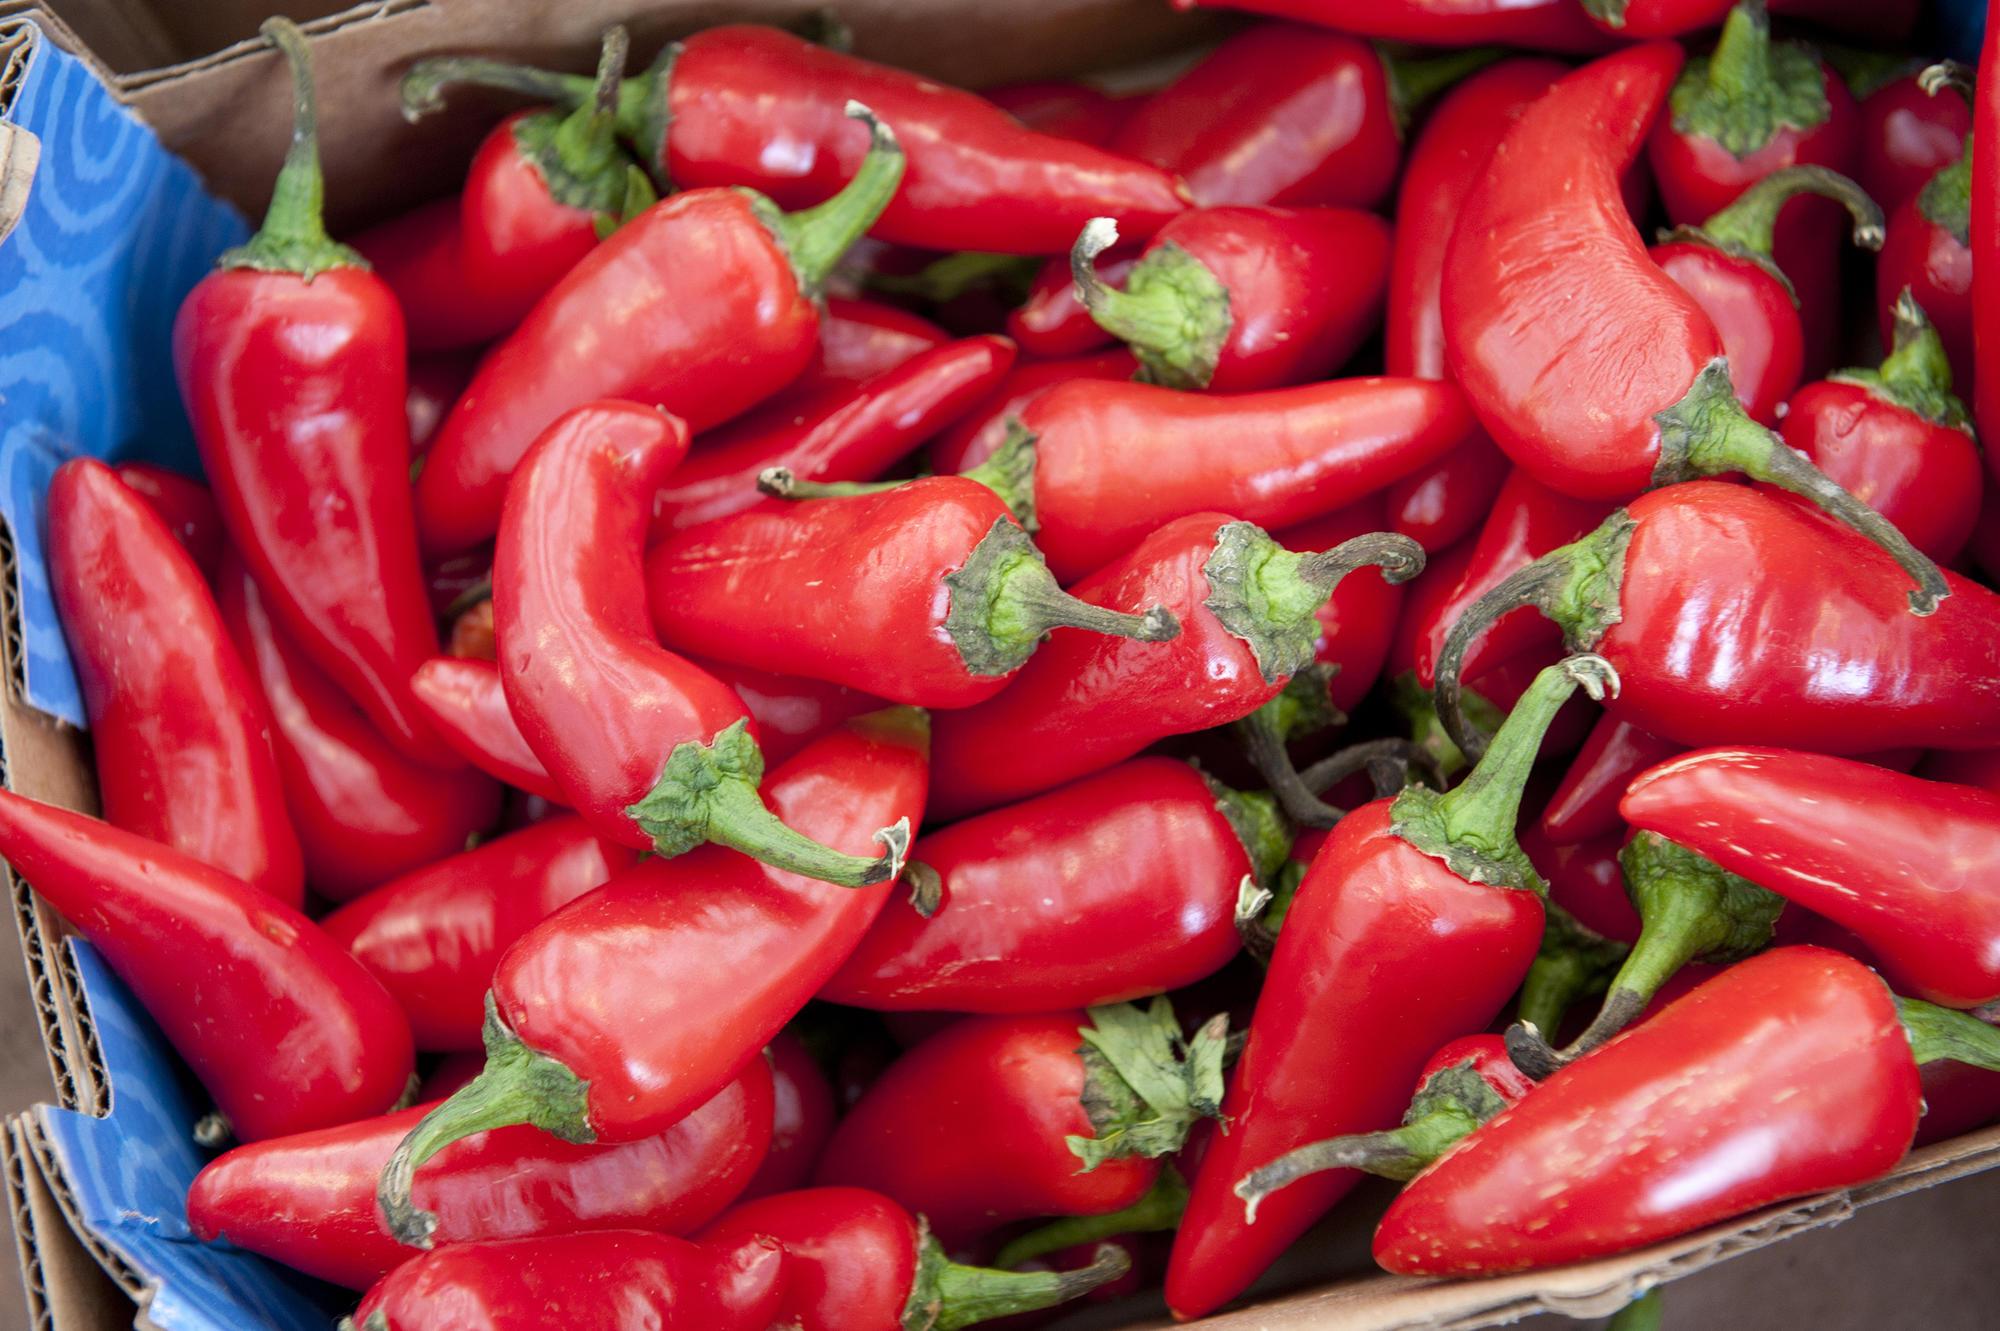 Spice up your garden with the perfect pepper